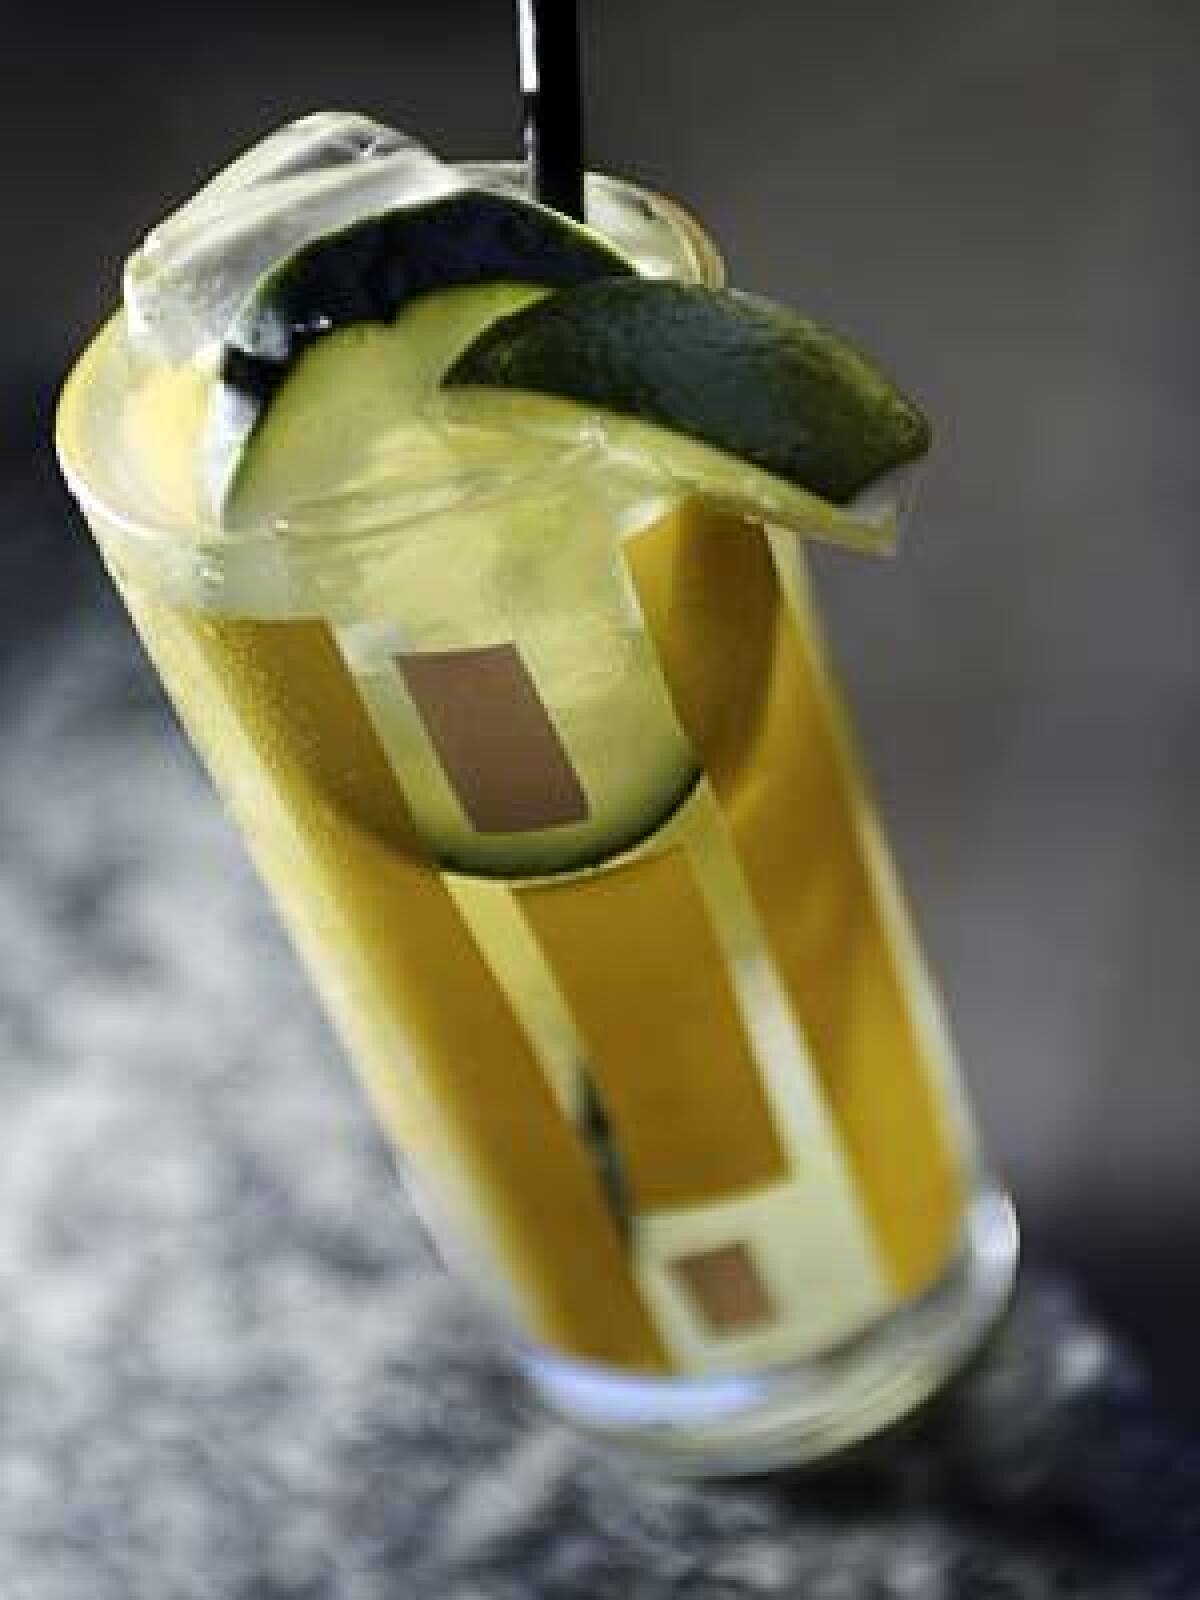 Ciudad's cucumber cooler rocks, with or without the vodka spike.